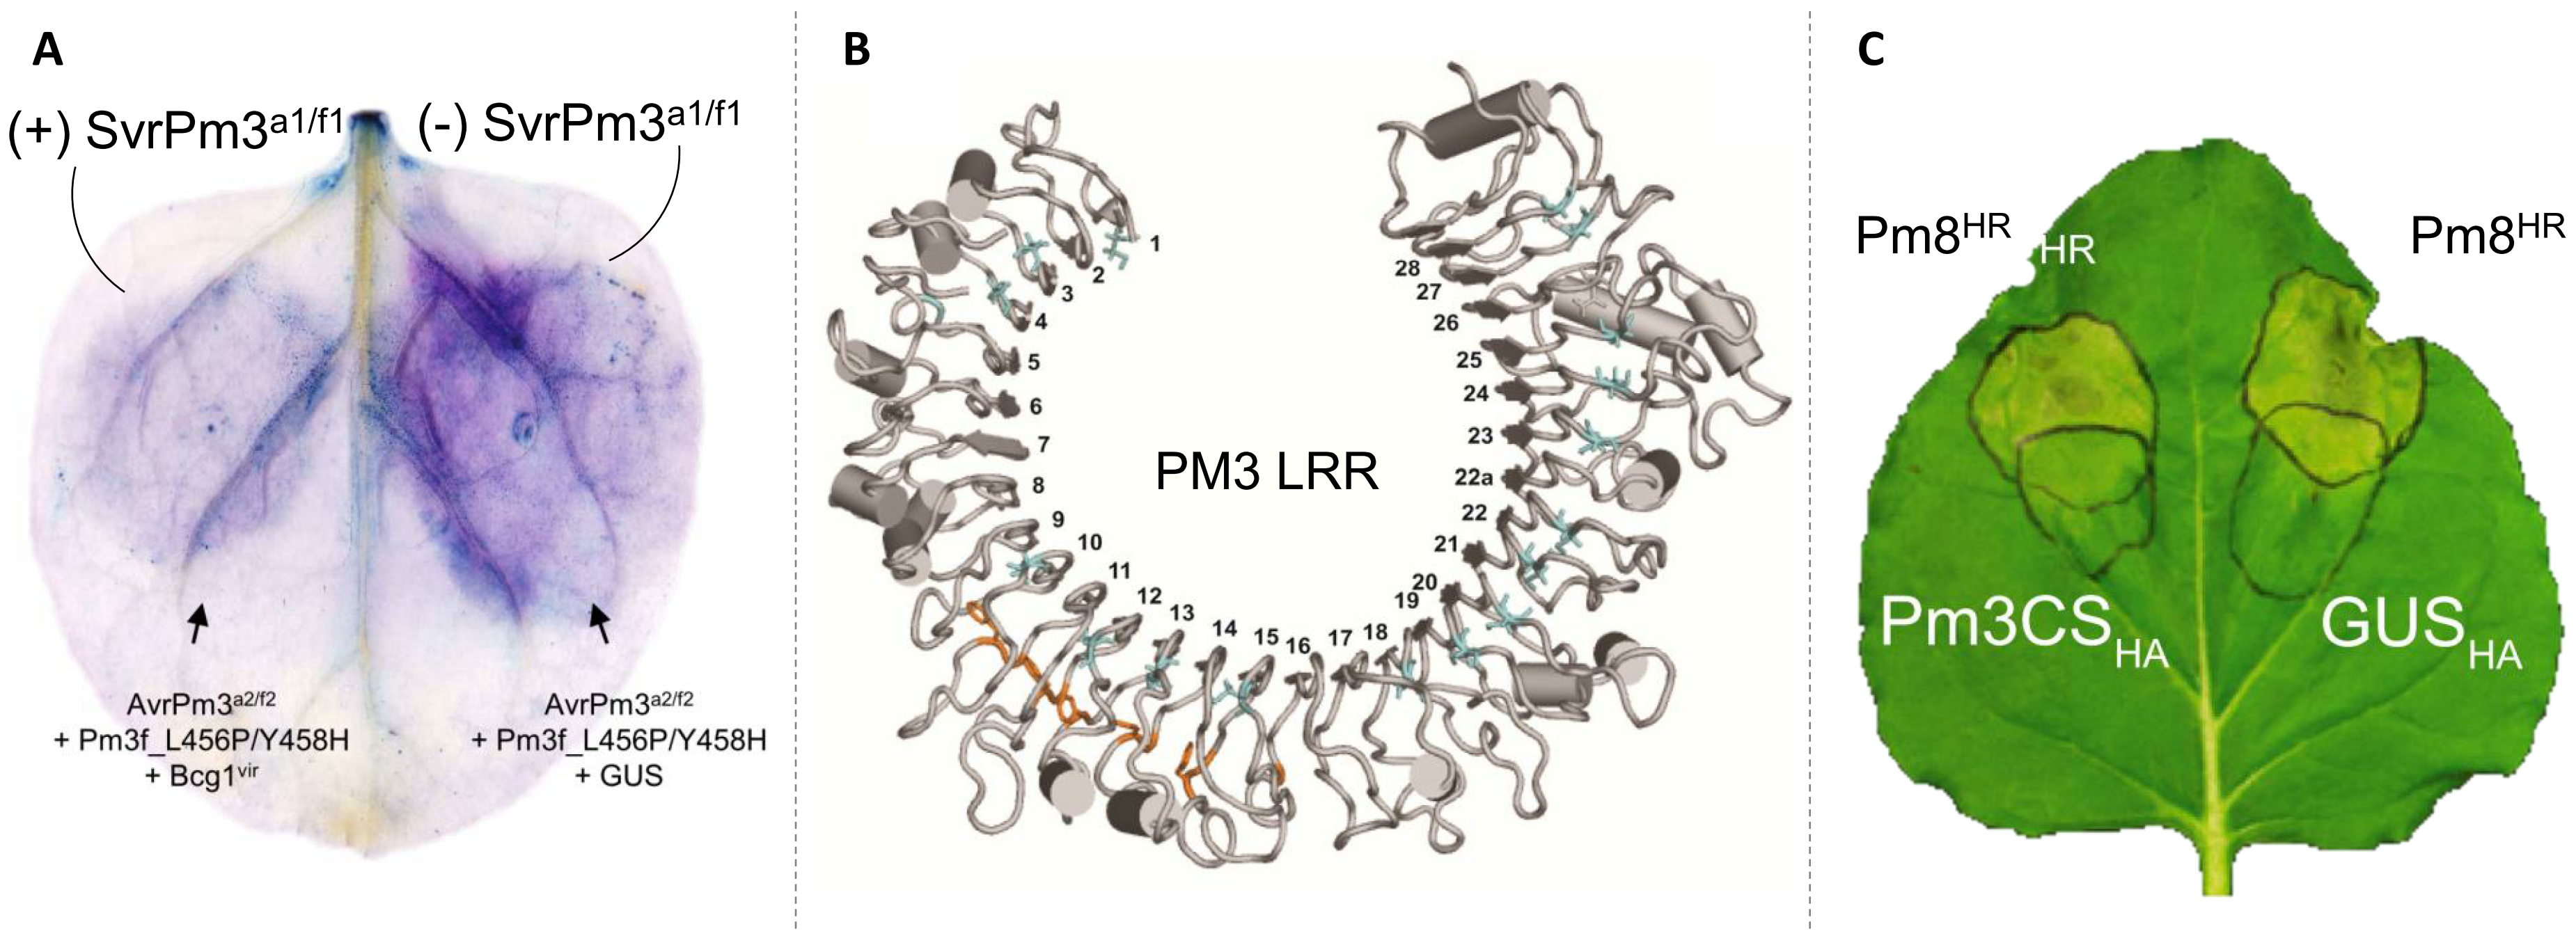 (A) Suppression of the AvrPm3a2/f2-Pm3f mediated hypersensitive cell death response (revealed by Trypan blues staining) in presence of the SvrPm3a1/f1 suppressor; (B) 3D computational modelling reveals a horse-shoe structure of the leucine-rich-repeats (LRR) region of the PM3 resistance protein; (C) Suppression of the hypersensitive cell death response mediated by the auto-activated Pm8 resistance gene in presence of the susceptible allele of the Pm3 resistance gene (Pm3CS).